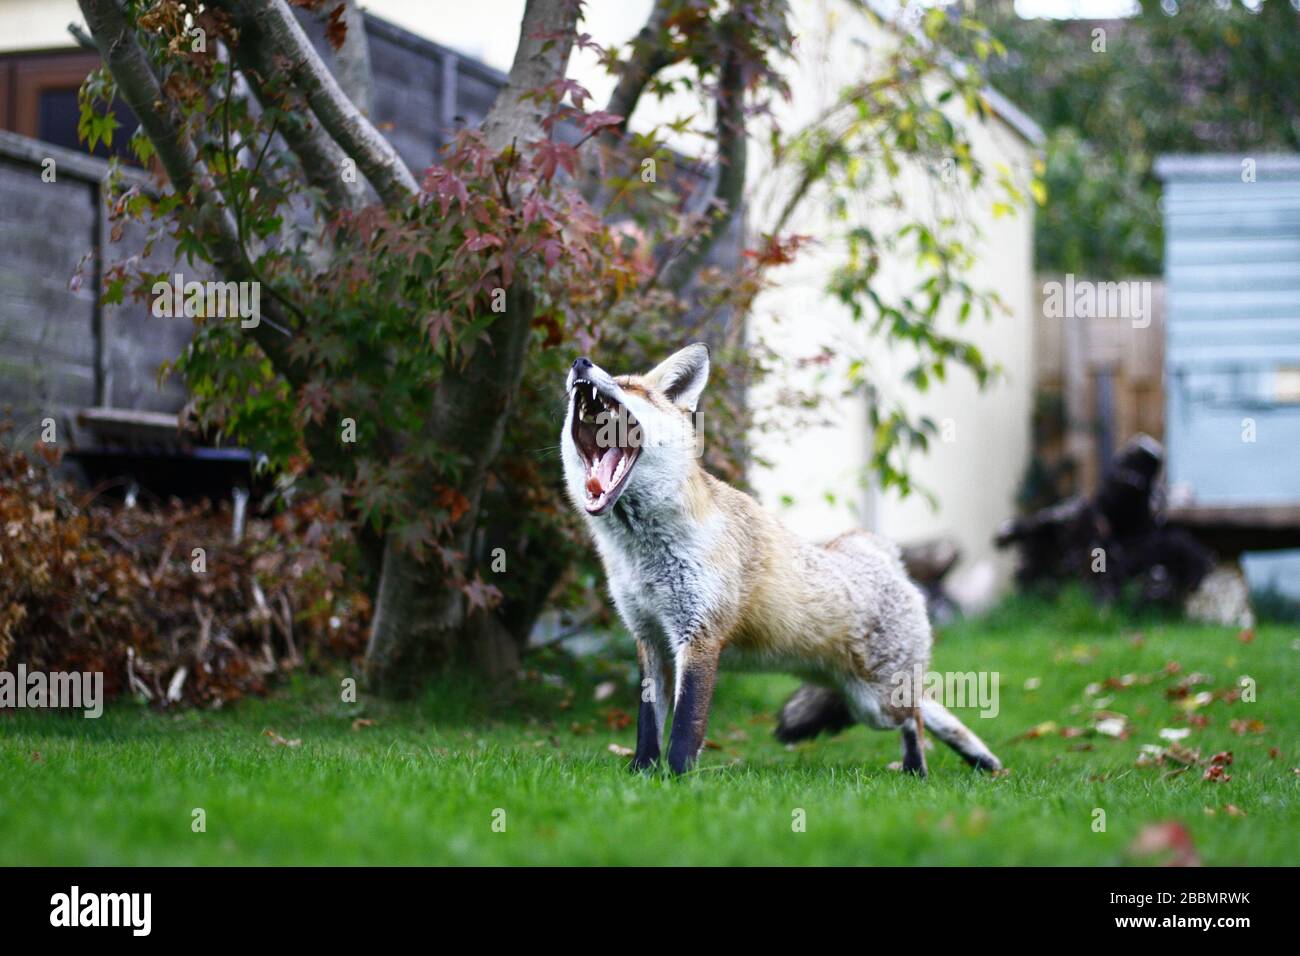 RED FOX IN A LONDON GARDEN WITH MOUTH WIDE OPEN EXPOSING TEETH. URBAN FOX. URBAN FOXES. LARGE MOUTH OF THE RED FOX. FOXES IN TOWNS AND CITIES. WINTER COAT. SUMMER COAT. FOX FUR. ANIMAL FUR. FURS. MAMMALS. WILD ANIMALS. WILDLIFE IN THE UNITED KINGDOM. WILDLIFE OF GREAT BRITAIN. WILDLIFE OF THE BRITISH ISLES. EUROPEAN FOX. FOX HUNTING. RURAL RELATIONSHIP WITH THE FOX. URBAN RELATIONSHIP WITH FOXES. FEAR OF THE FOX ENTERING HOUSES. FOX ATTACK. STORIES OF FOXES ATTACKING HUMANS. Fox news and wildlife news. Russell Moore portfolio  page. Stock Photo